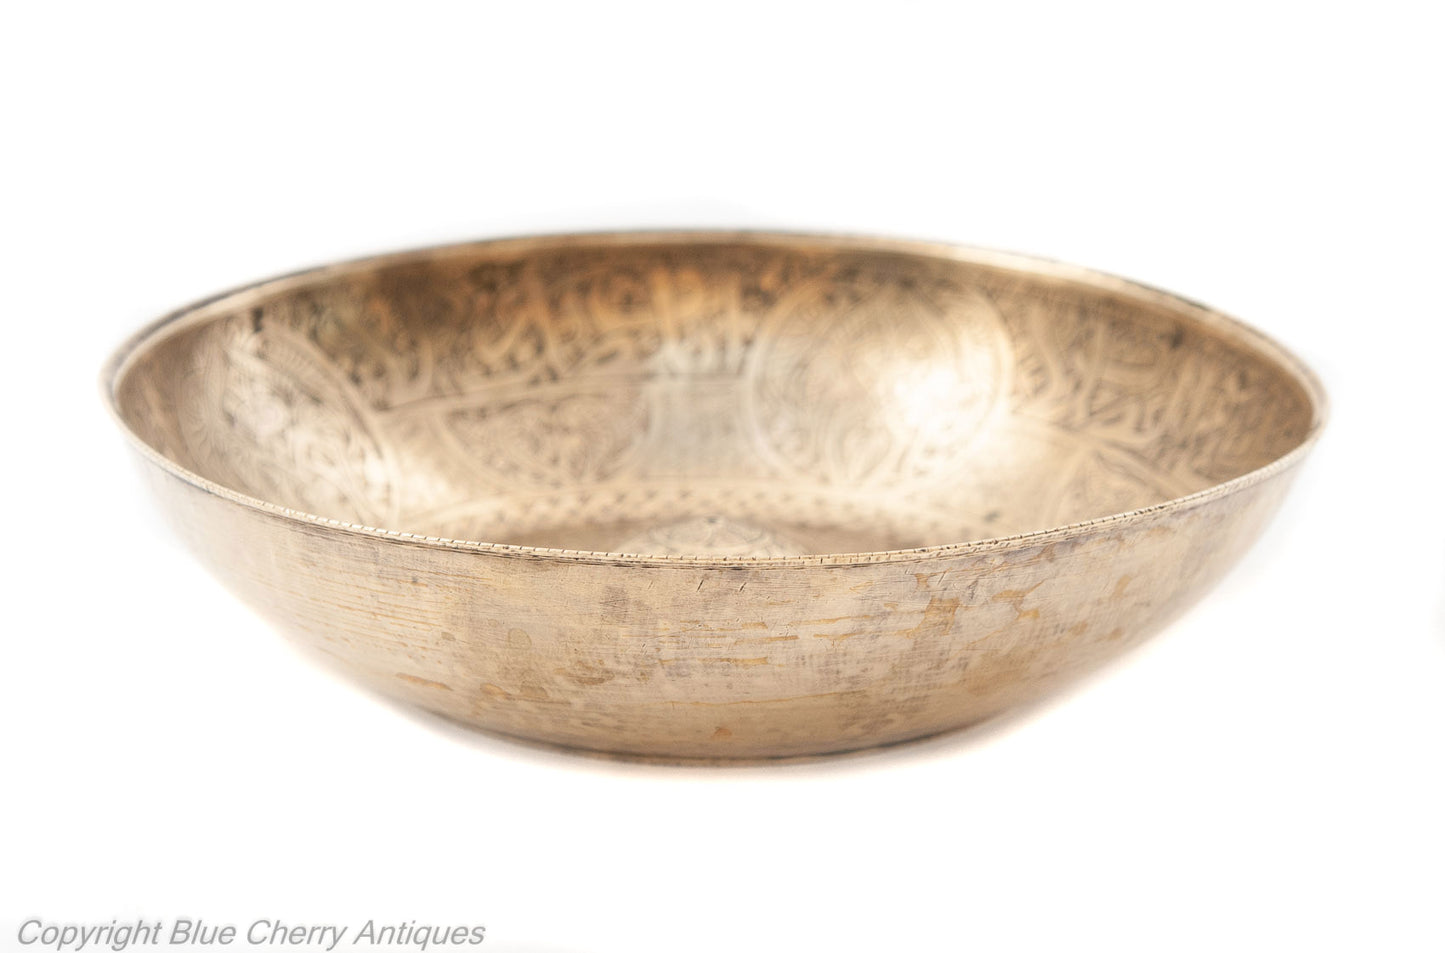 Qajar Antique Middle Eastern Engraved Brass Magic Bowl with Islamic Calligraphic Script (Code 1819)